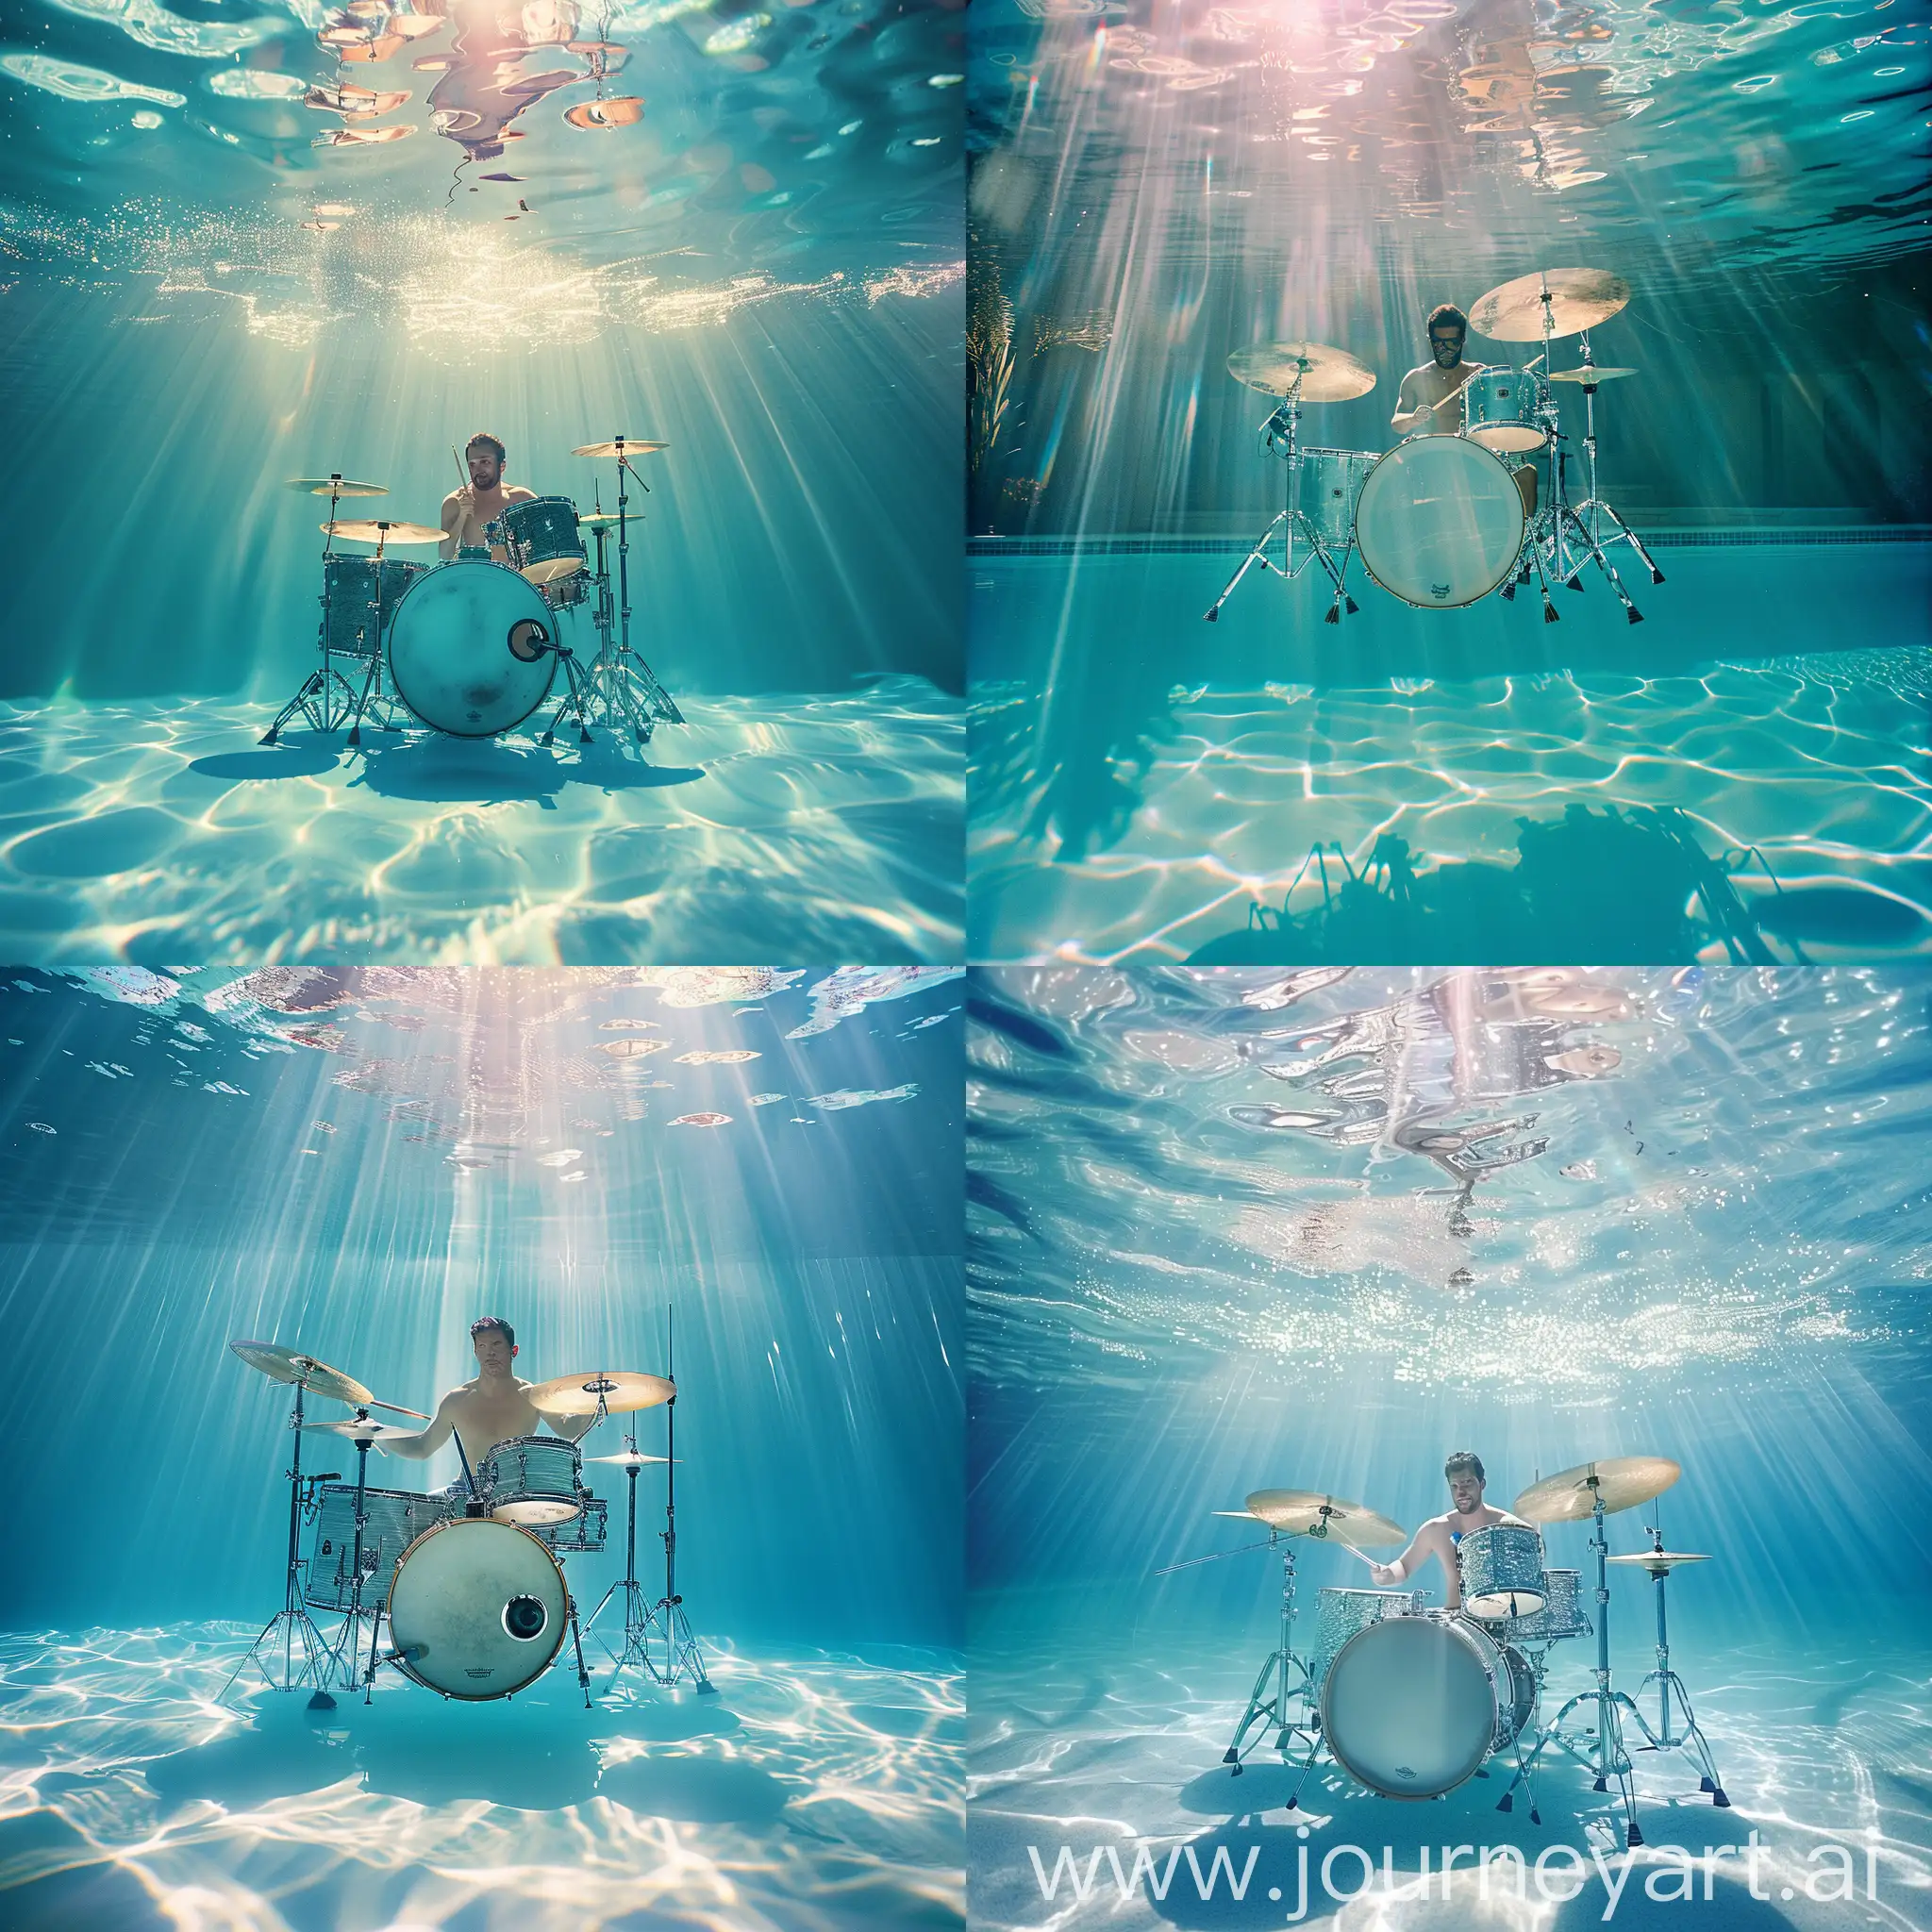 A drummer playing drums whole floating in a big swimming pool with sunrays shining through the blue water 